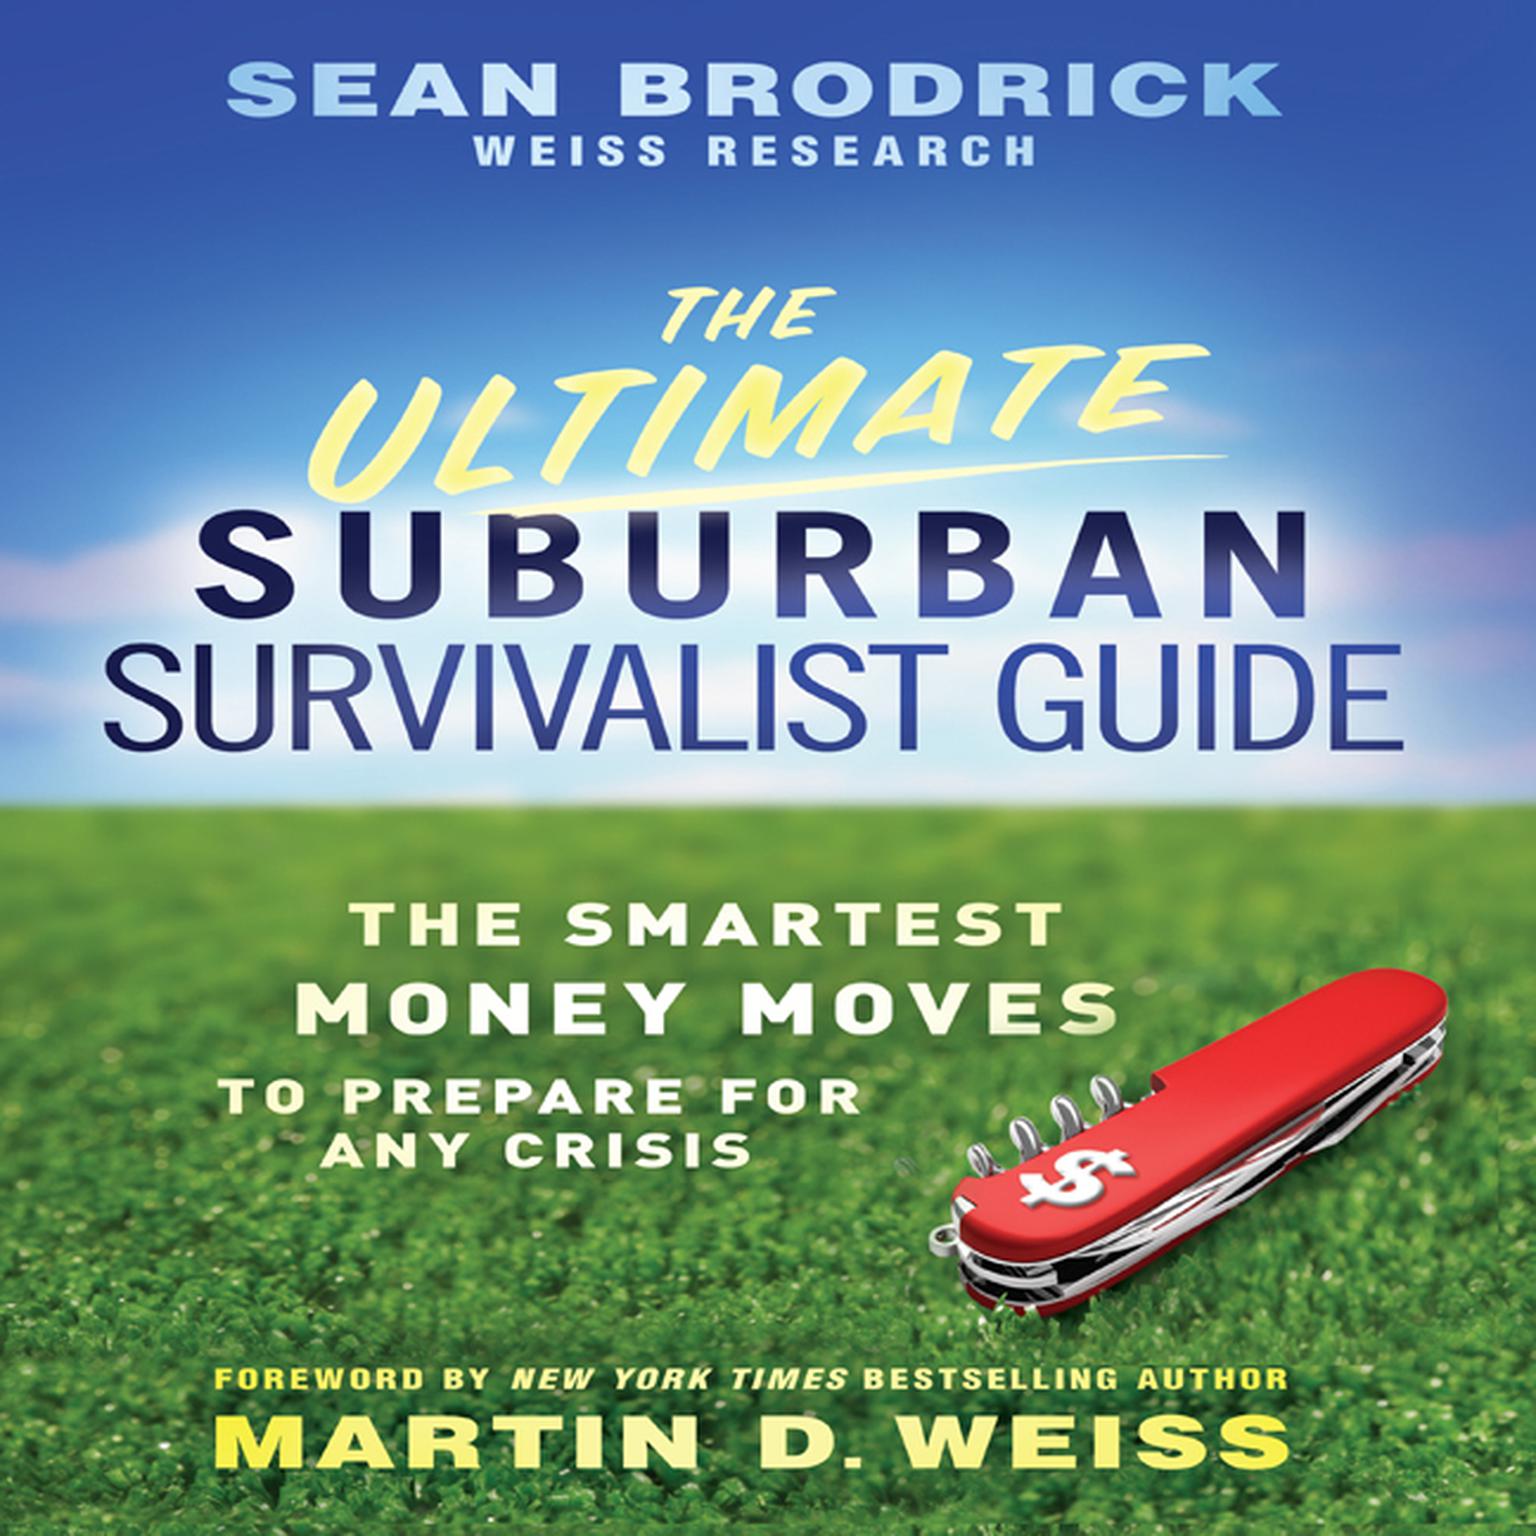 The Ultimate Suburban Survivalist Guide: The Smartest Money Moves to Prepare for Any Crisis Audiobook, by Sean Brodrick